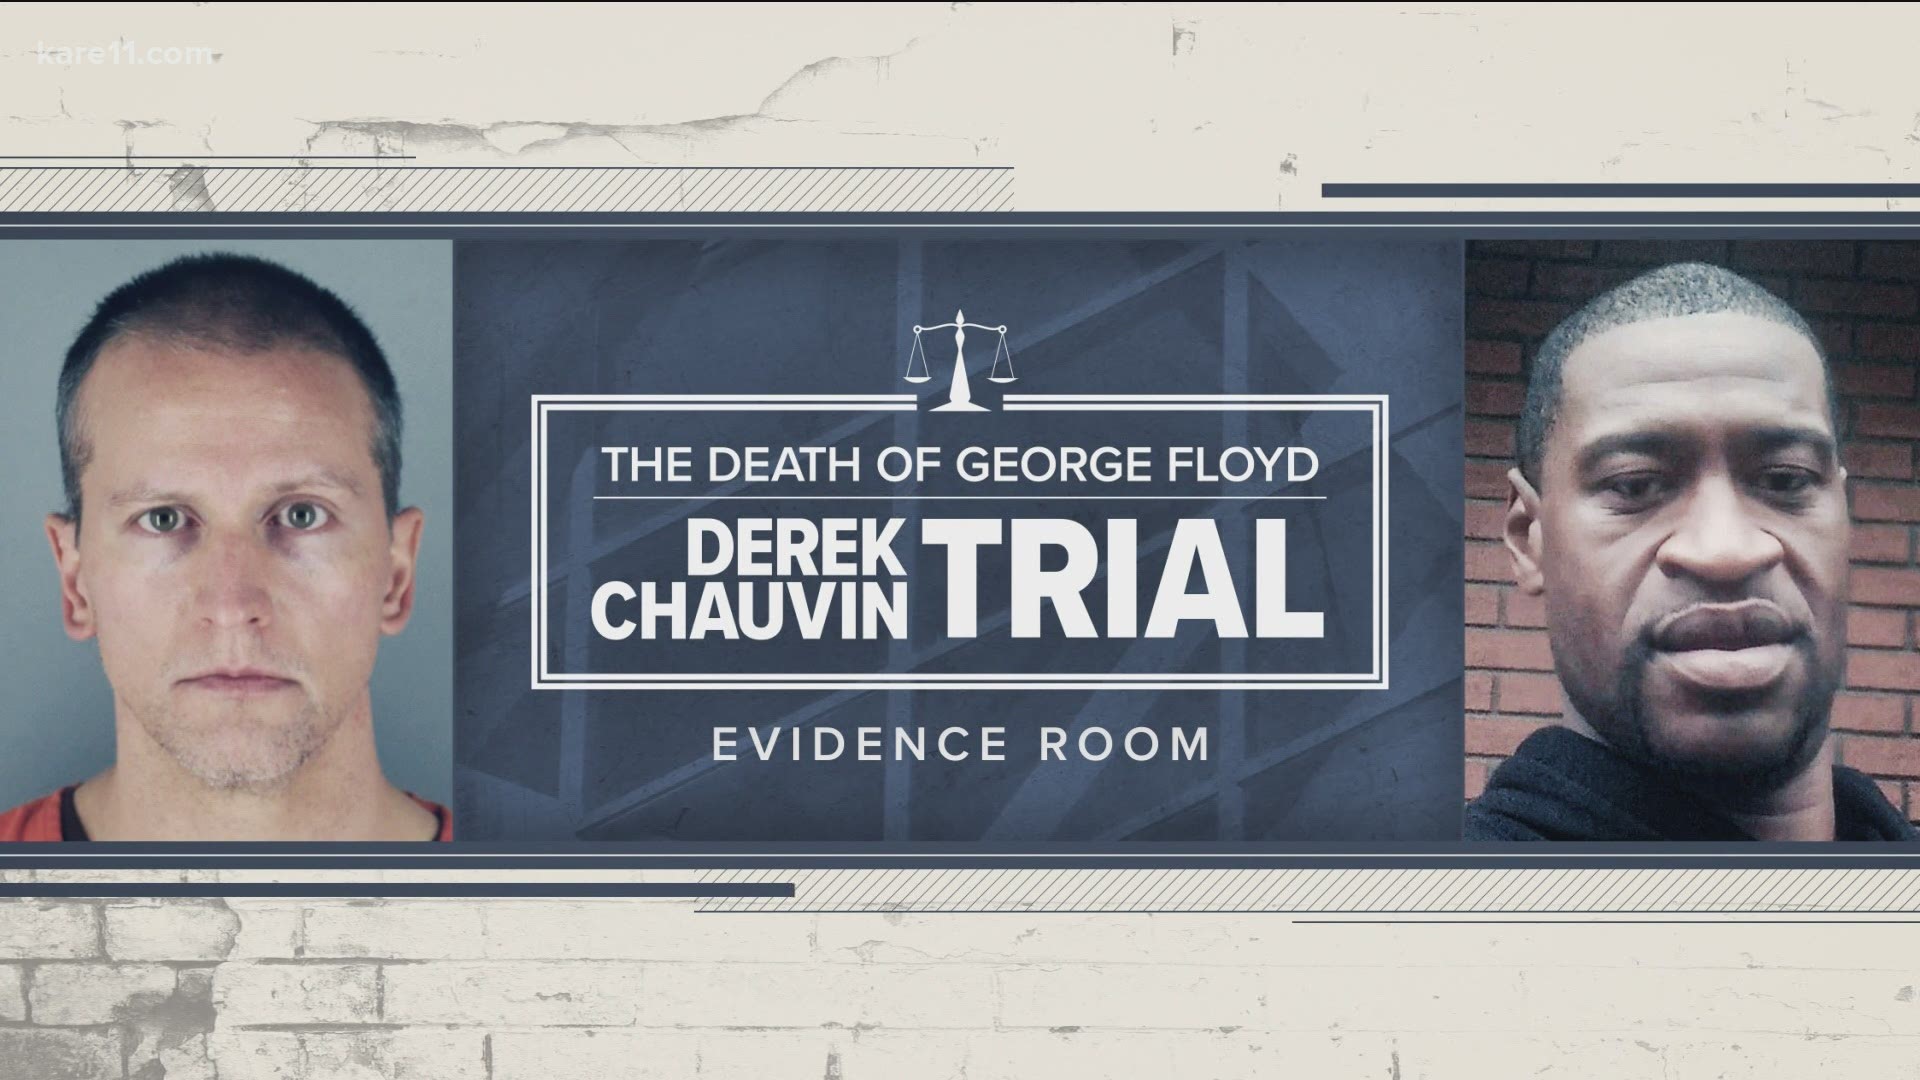 Prosecution expert tells jurors in Derek Chauvin’s murder trial that previous studies downplaying the danger of prone restraint are “highly misleading”